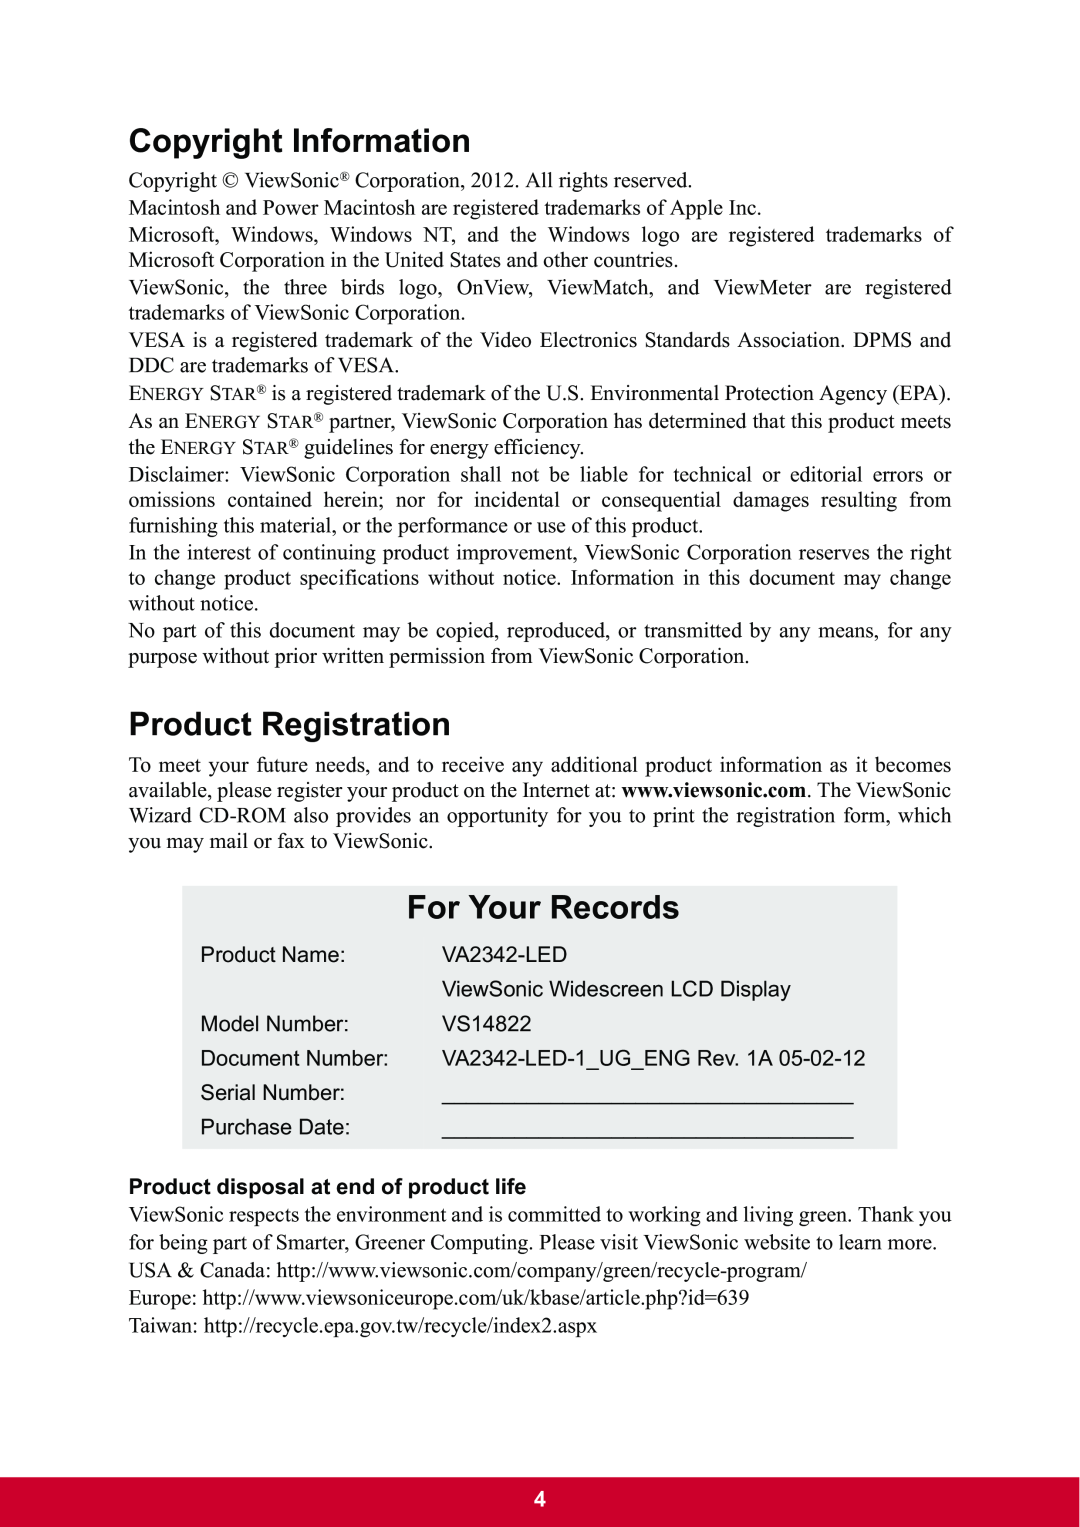 ViewSonic VA2342-LED warranty Copyright Information, Product Registration, For Your Records 